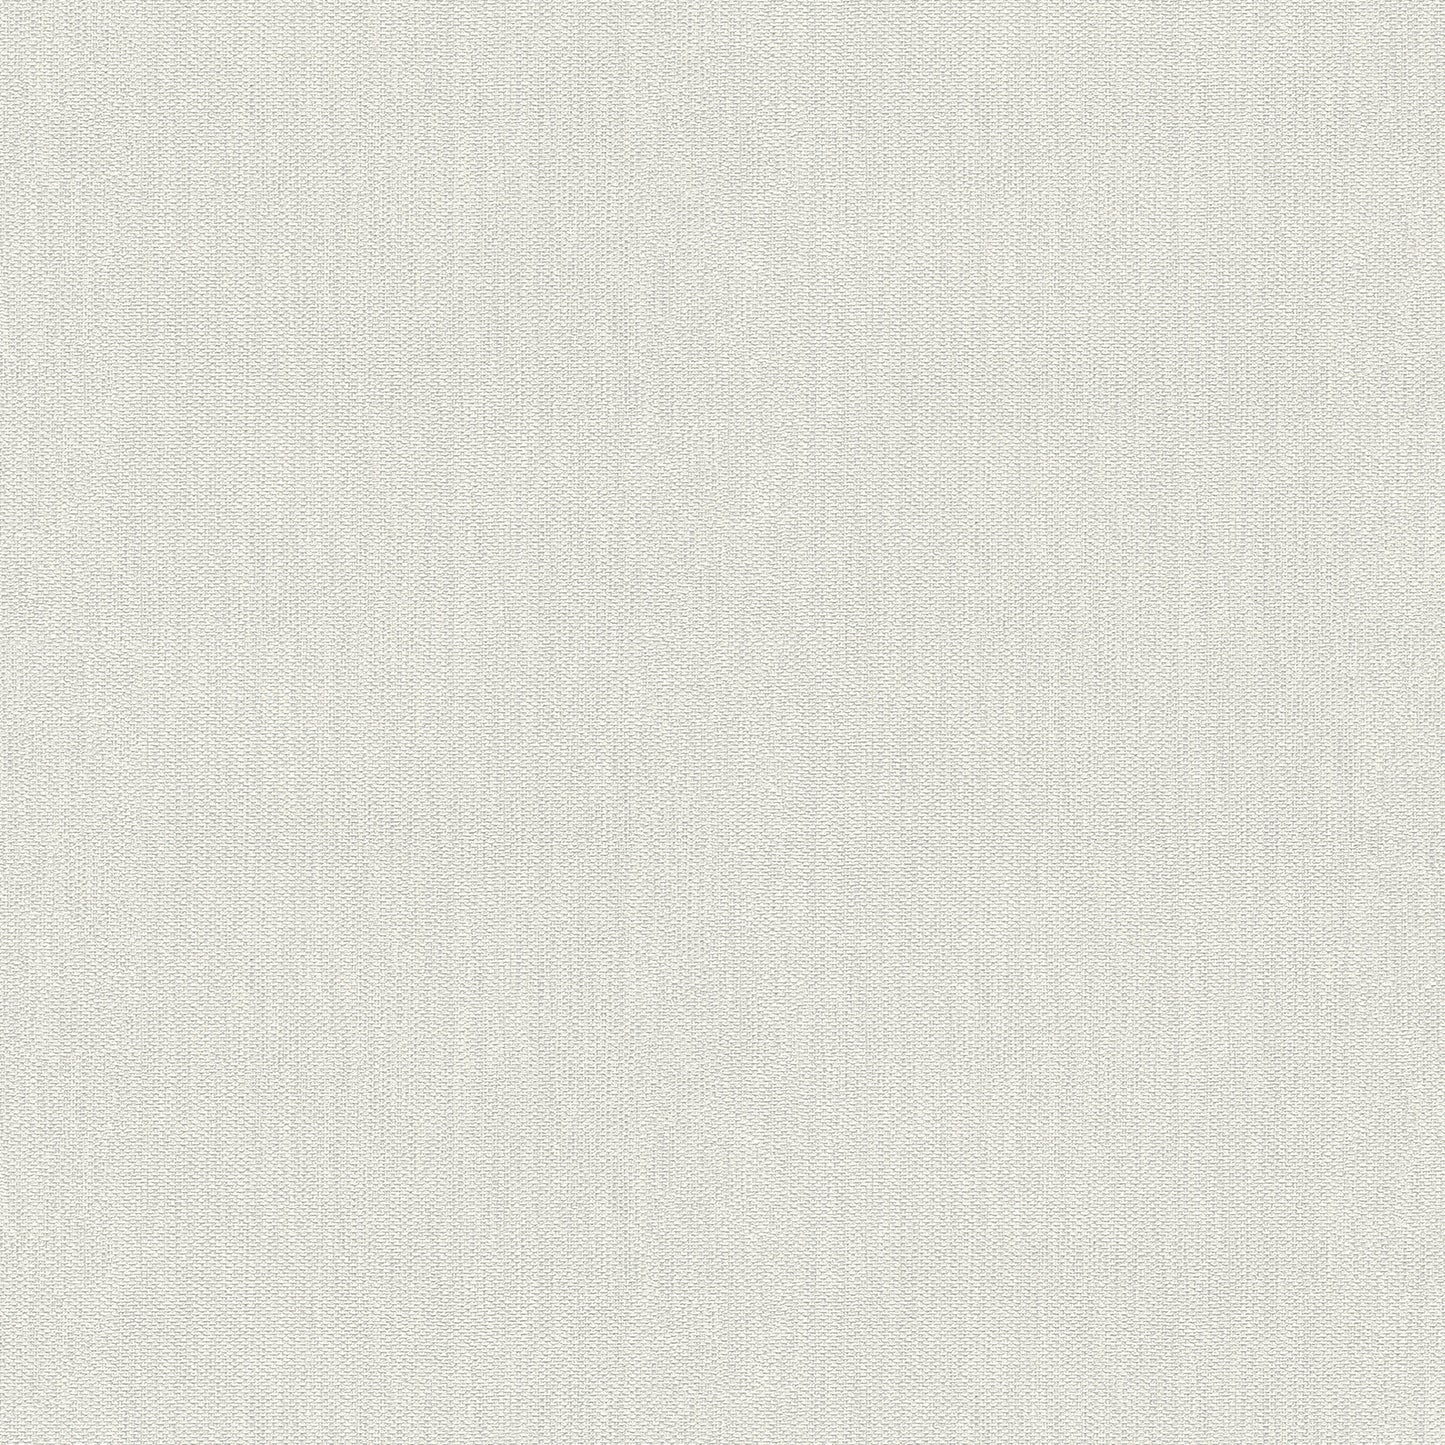 Buy 2979-3443-11 Bali Cahaya Off-White Texture Off-White by Advantage Wallpaper